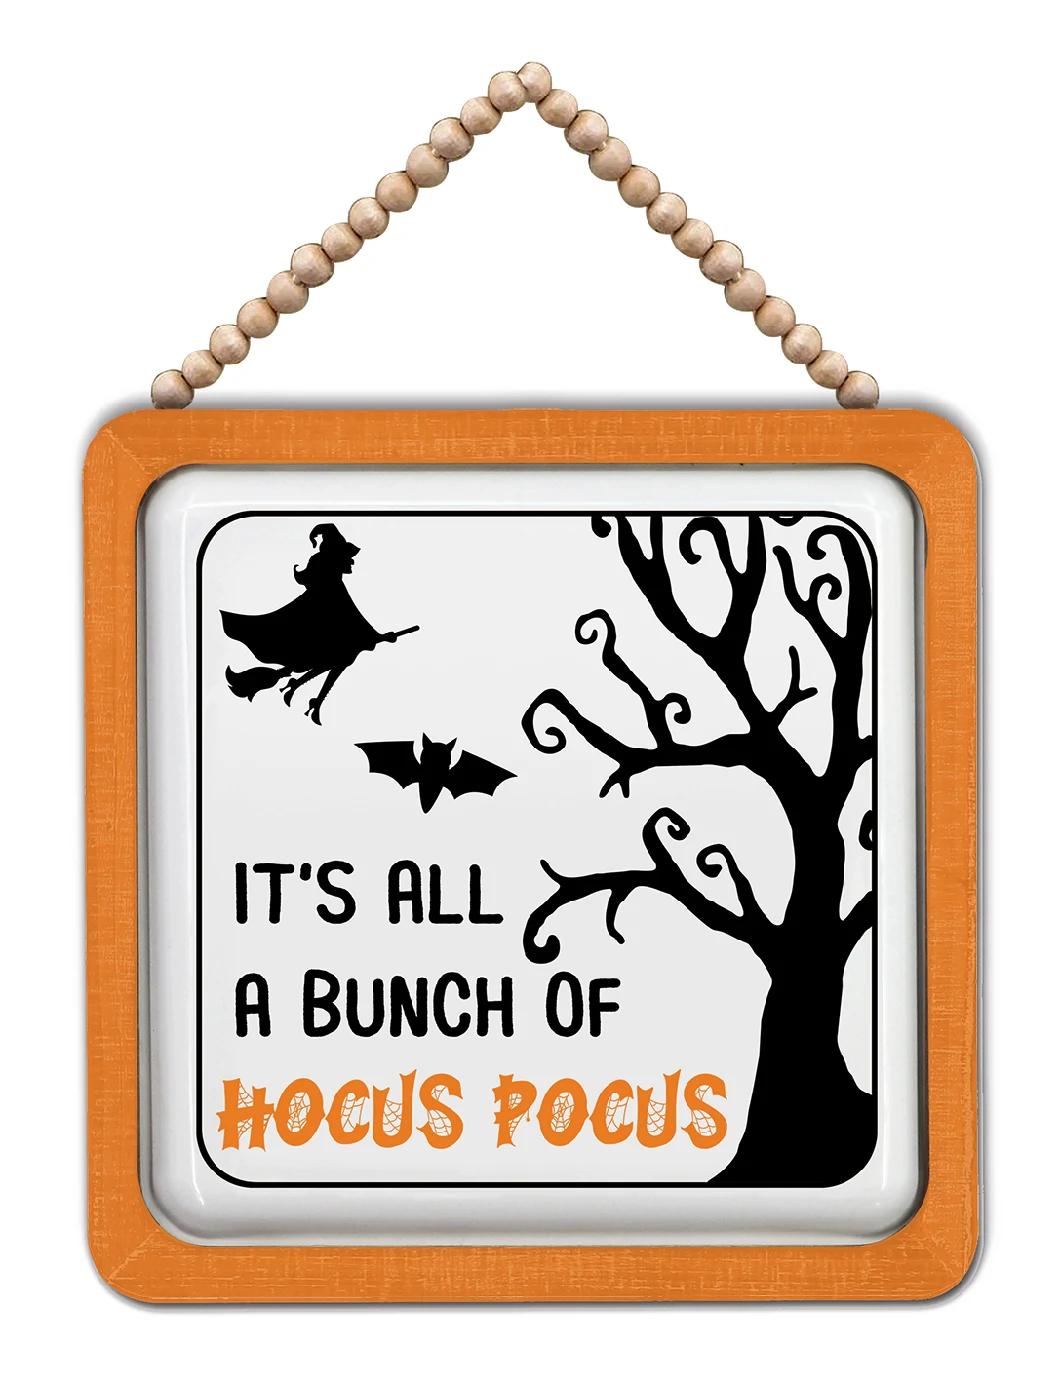 Customized Wooden Bead Decorated Wooden Frame Metal Halloween Sign